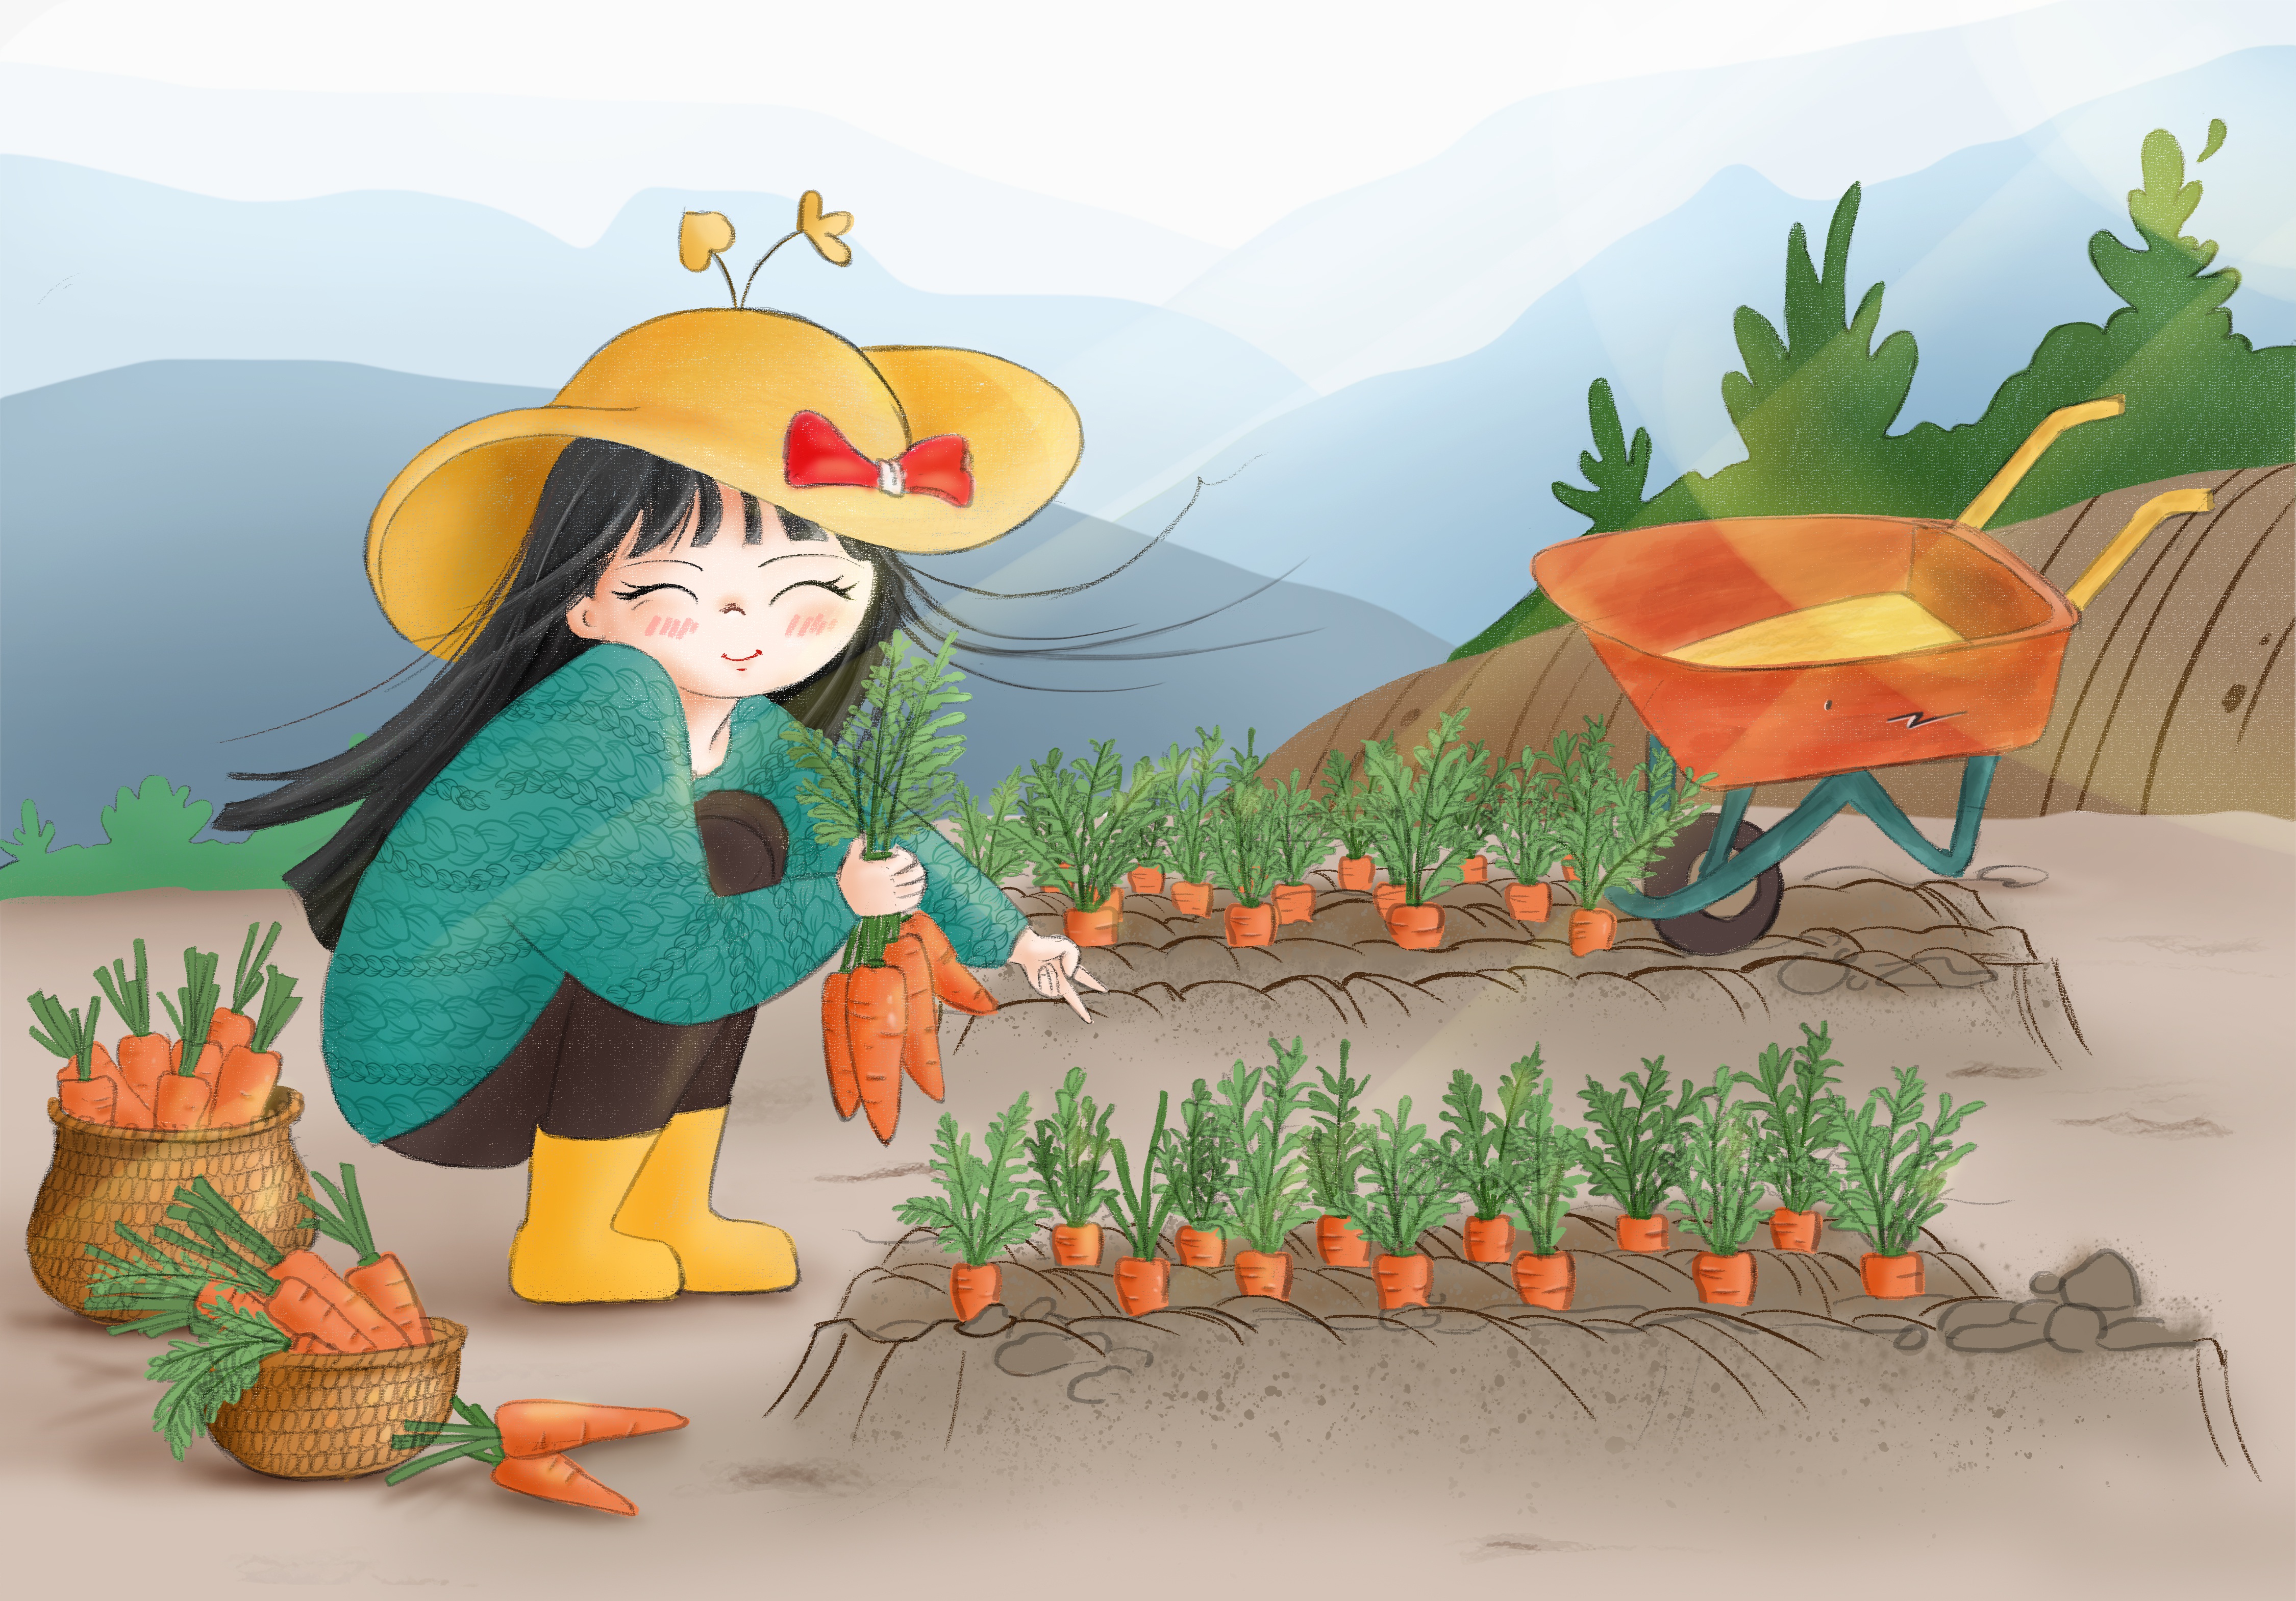 Illustration of a girl in a garden pulling carrots